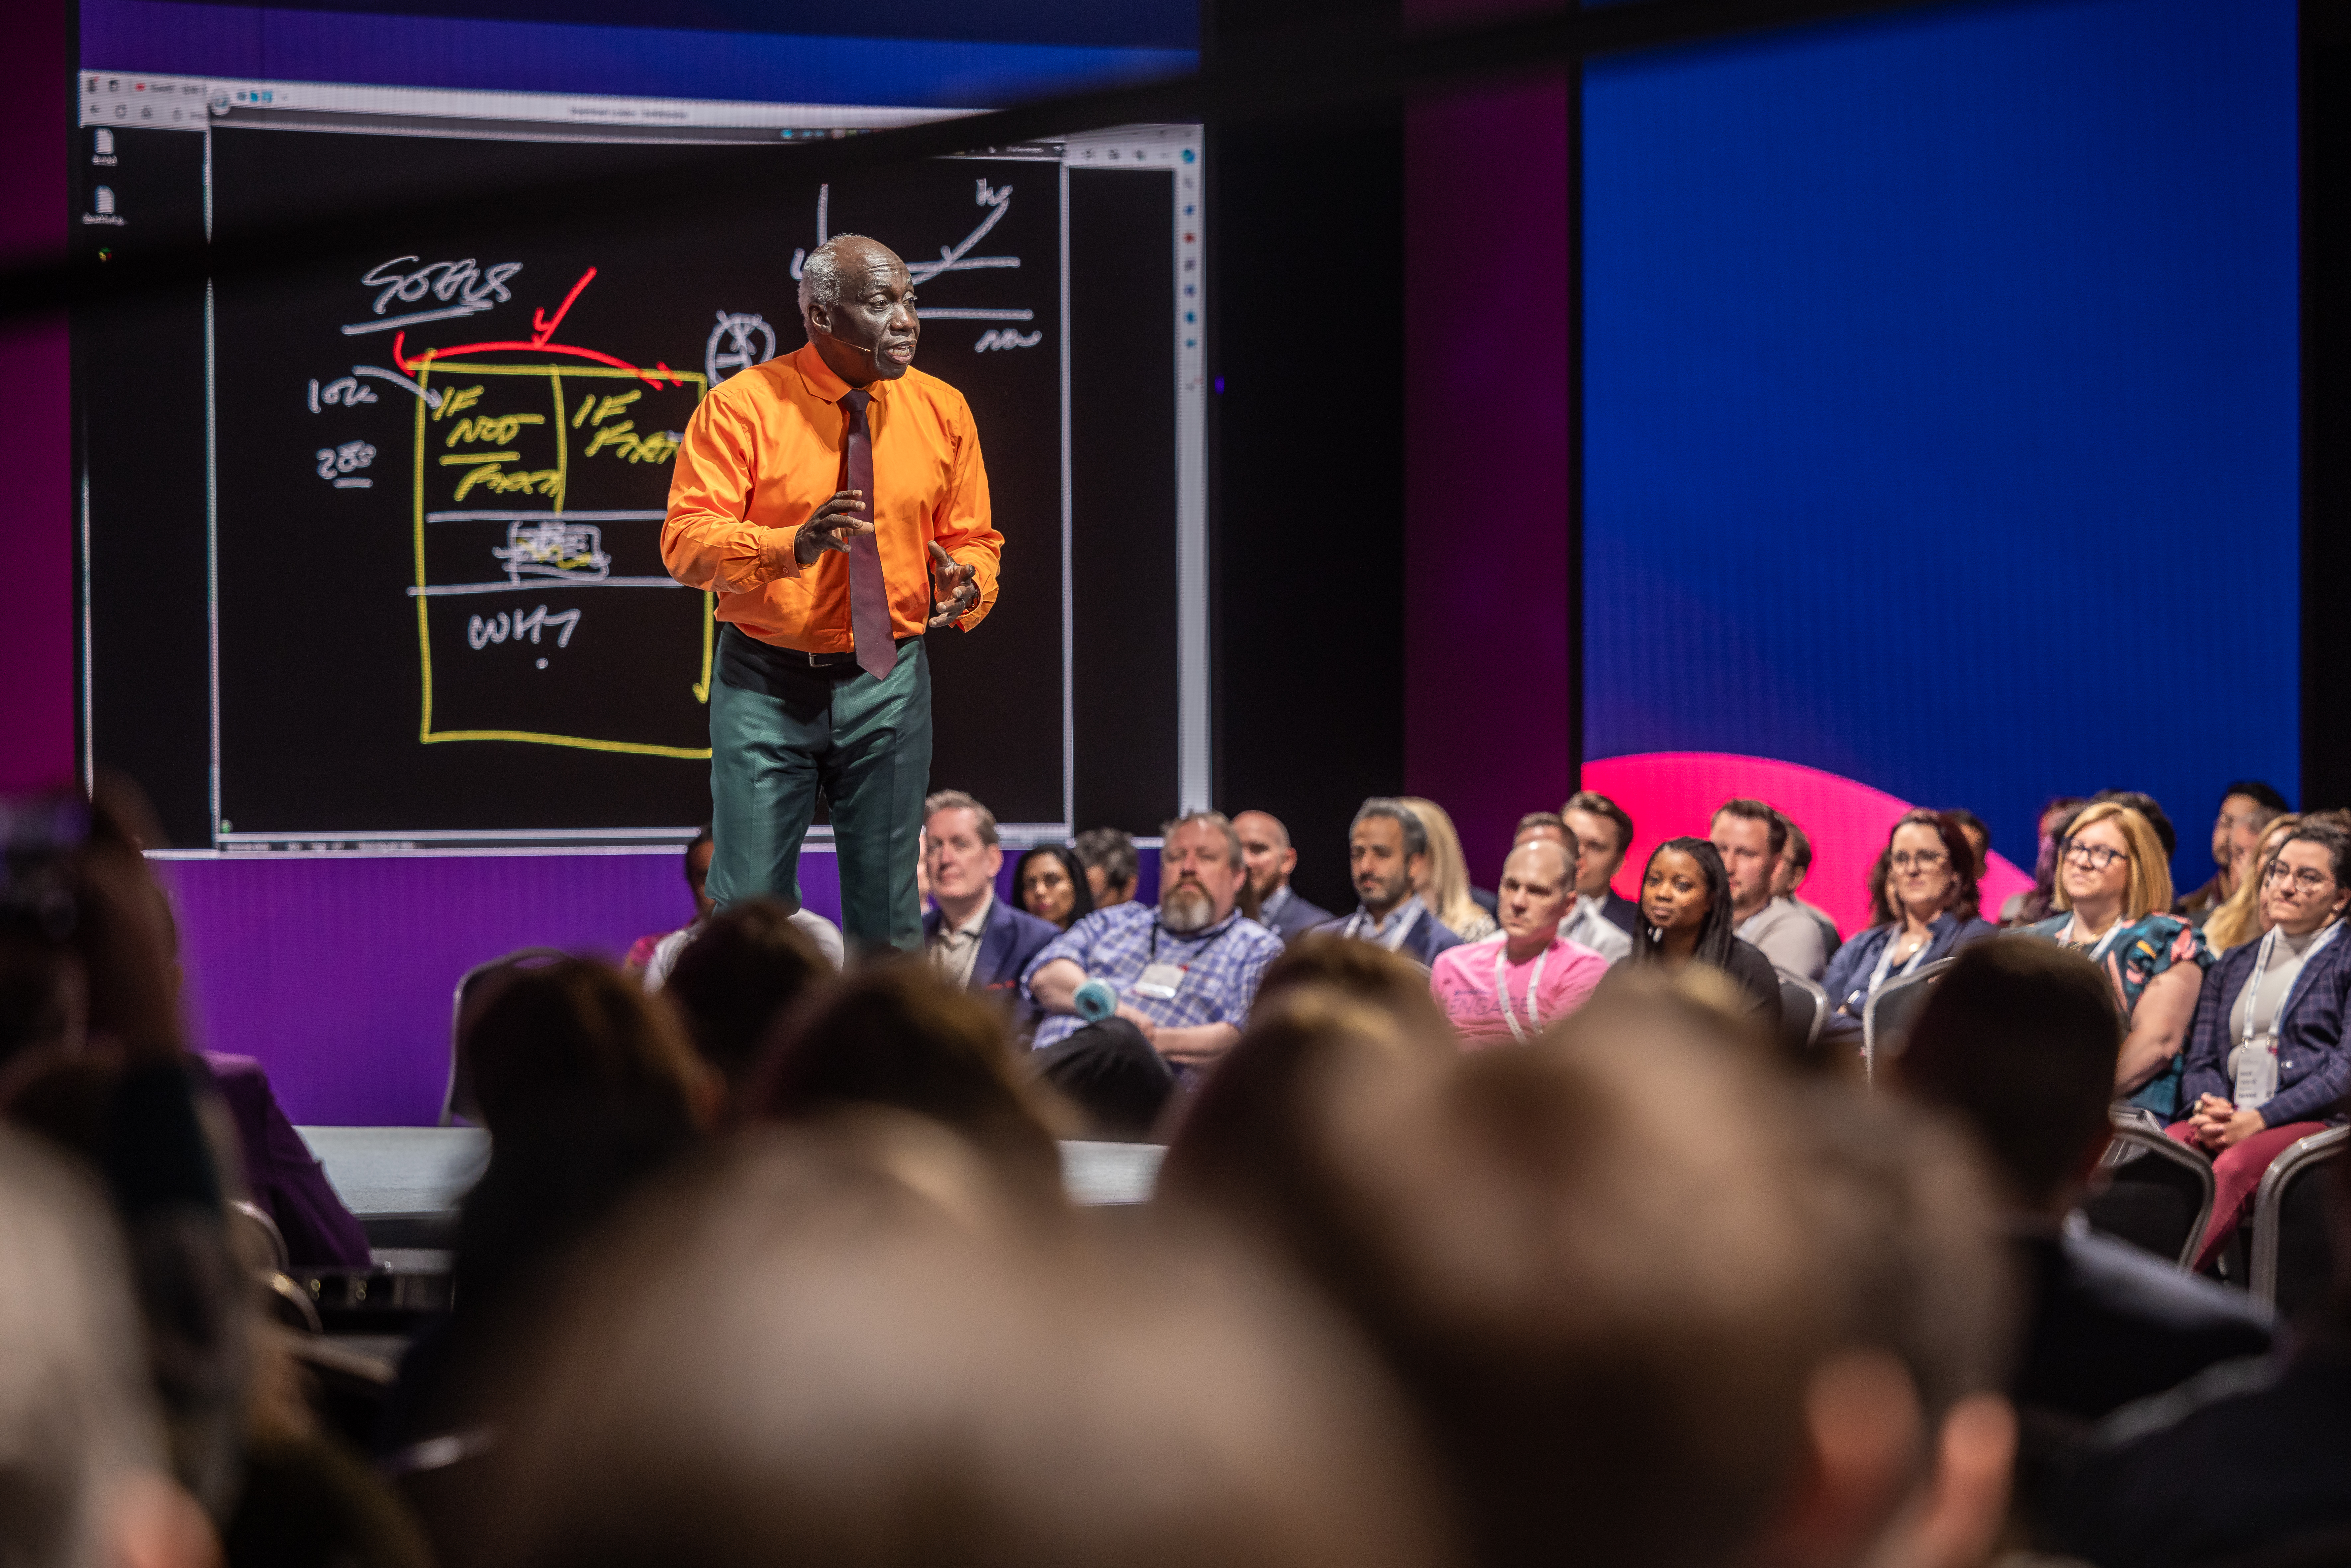 Pentacle Business School Learning Director and CEO Eddie Obeng, PhD, MBA, delivers a keynote address on stage during Smartsheet ENGAGE in London.